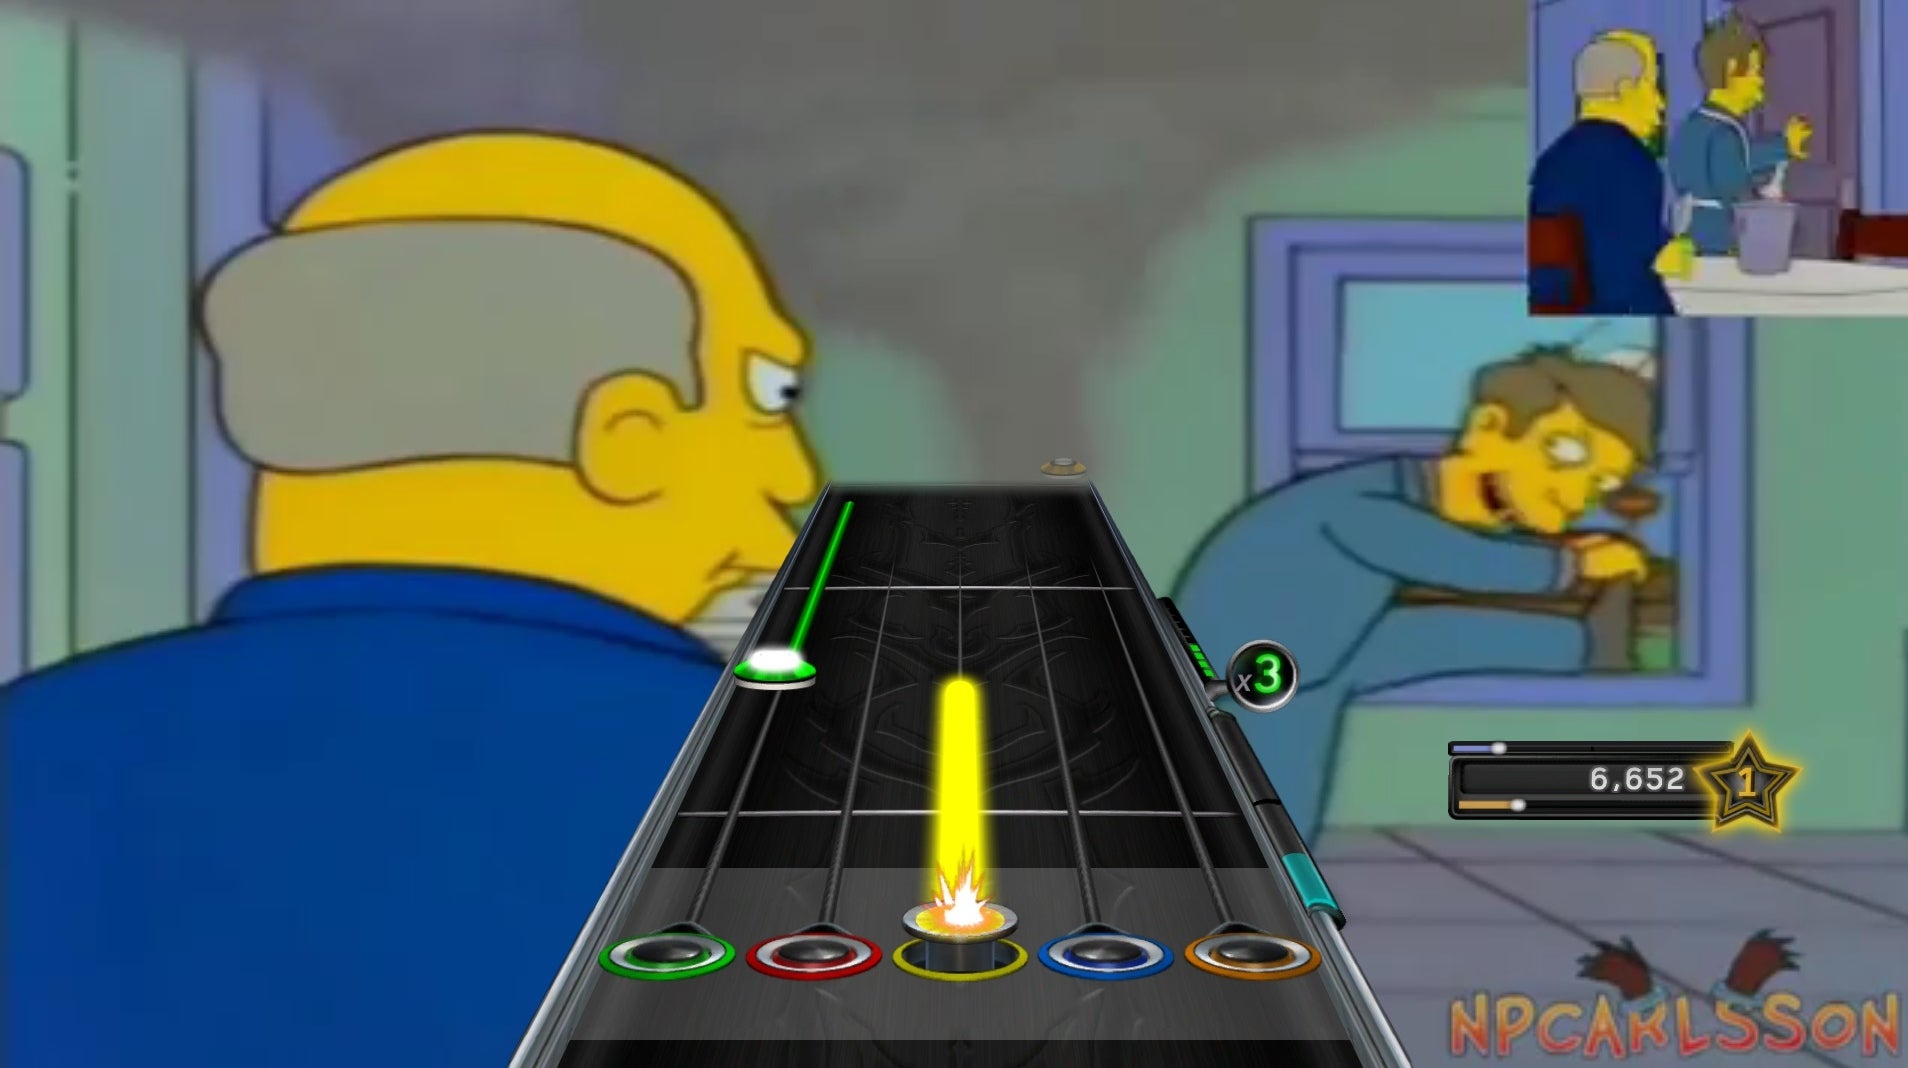 Image for The spirit of Guitar Hero lives on in a bizarre community-made clone